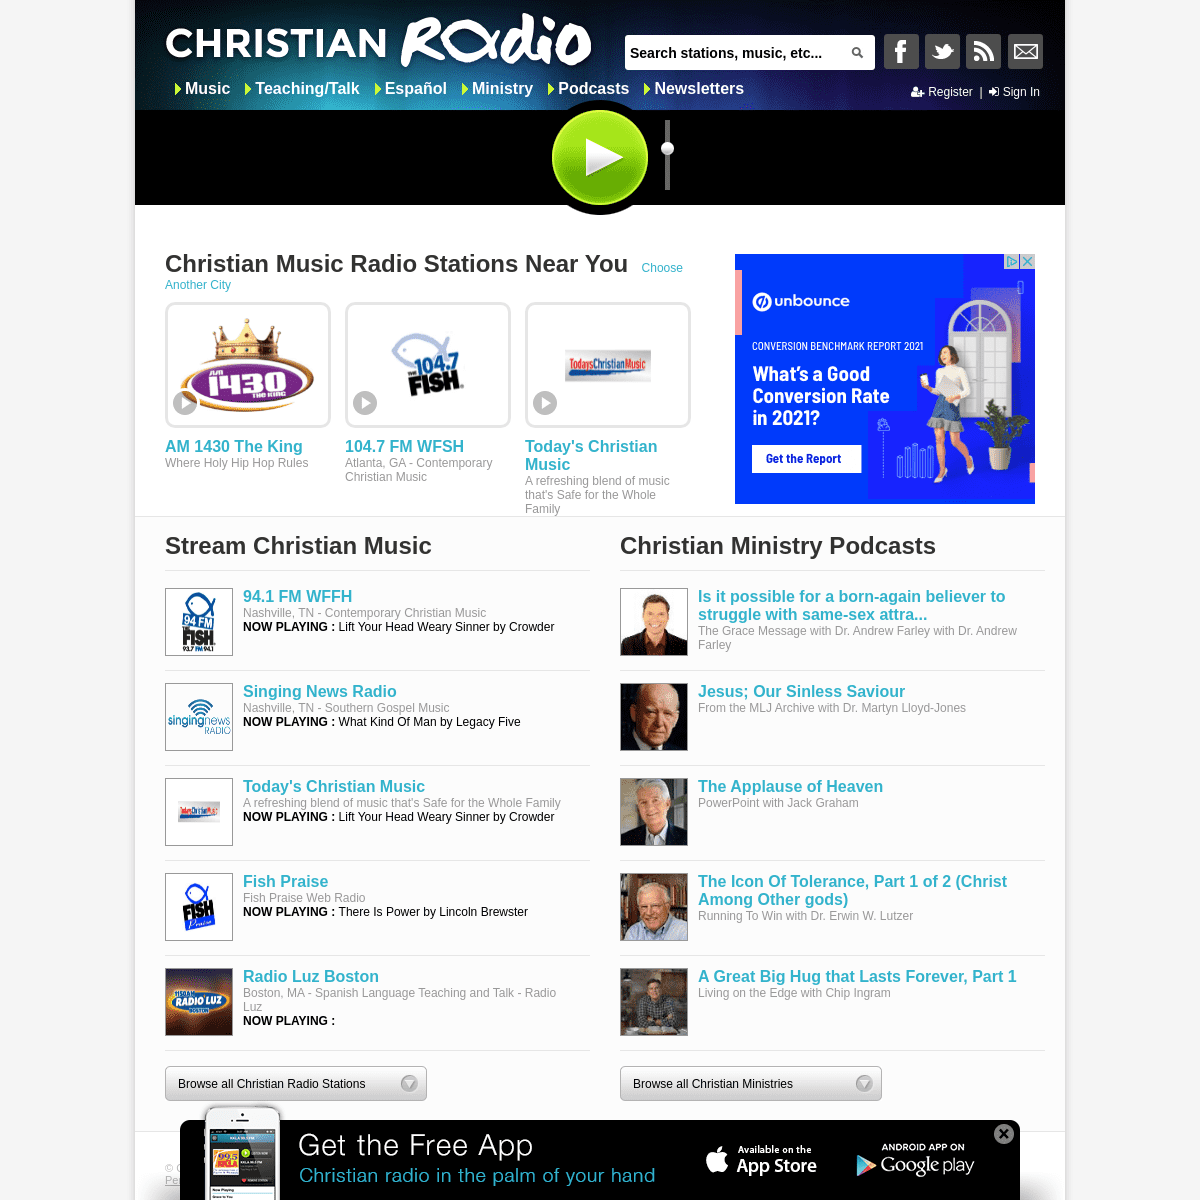 A complete backup of https://christianradio.com